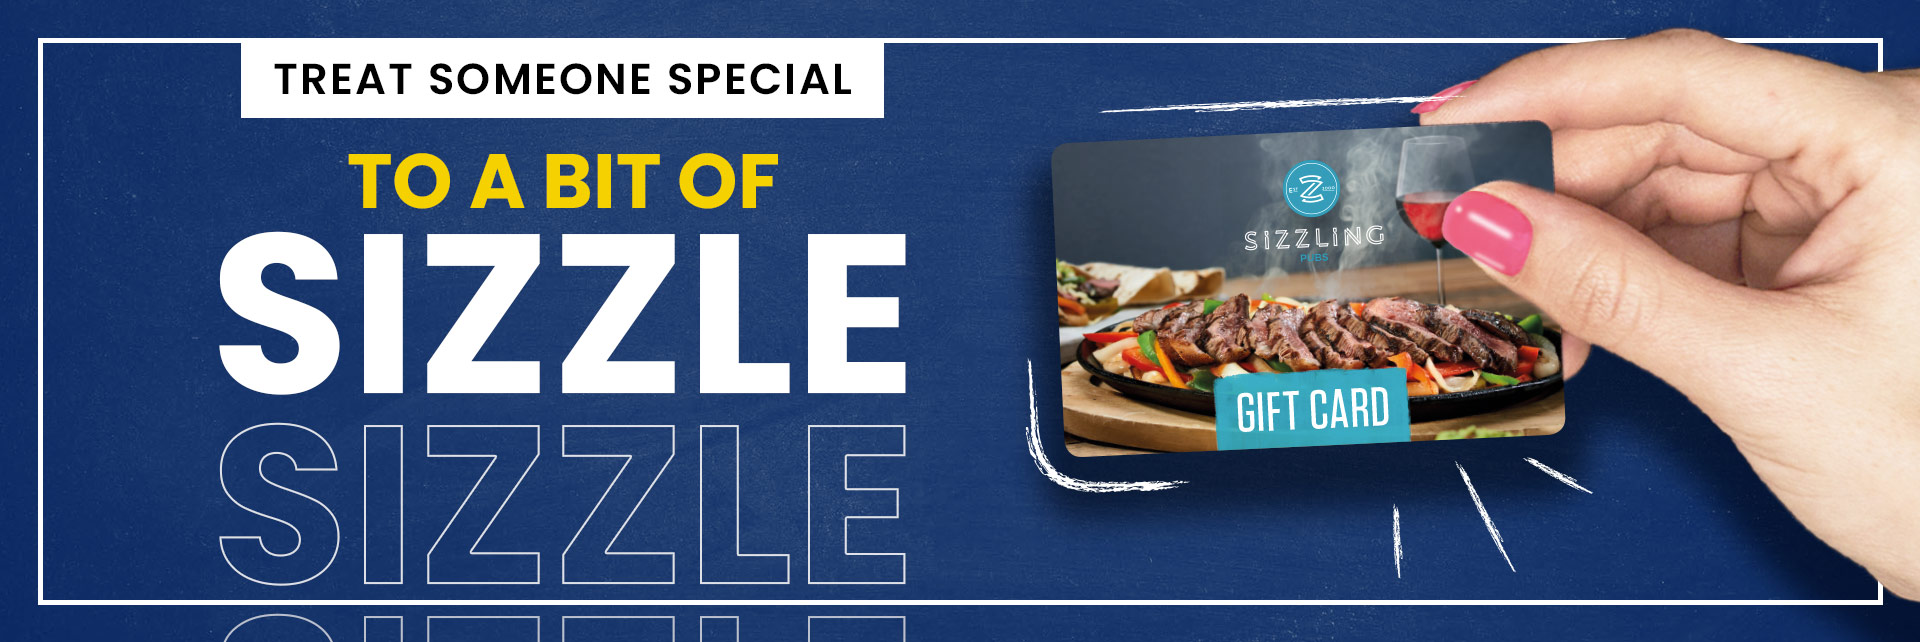 Sizzling Pubs Gift Card at The Sharman's Cross in Solihull